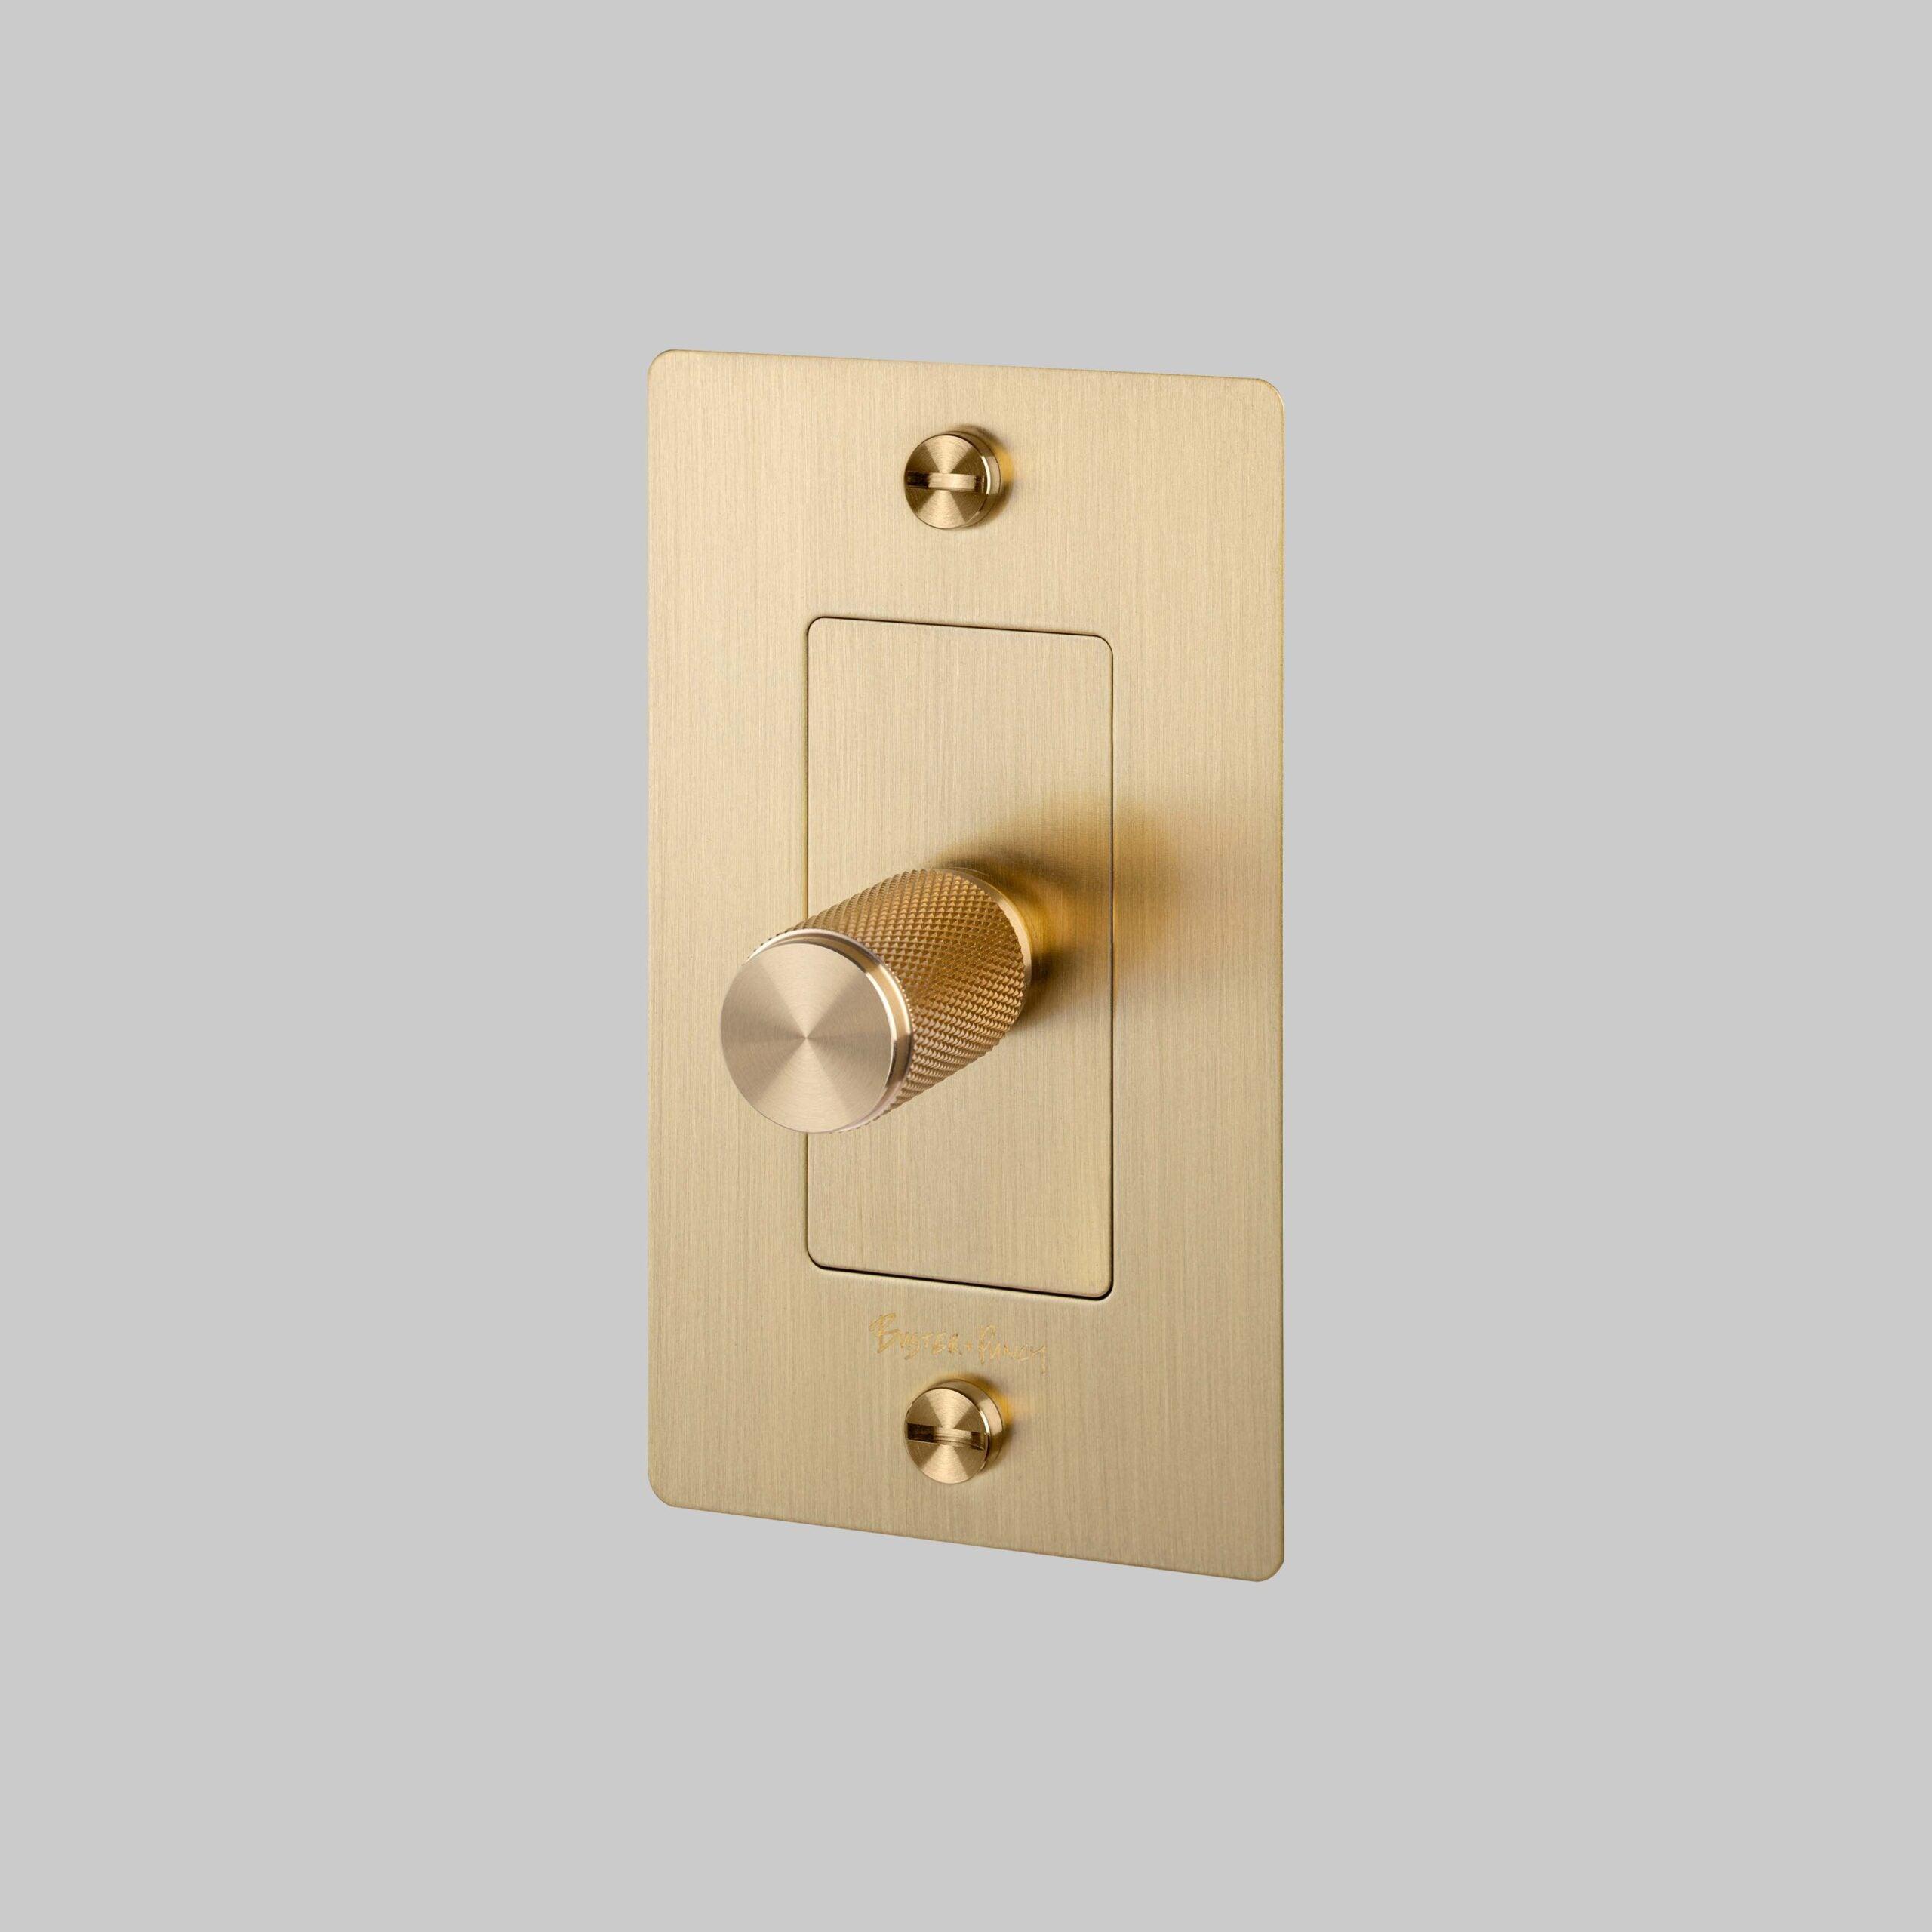 Buster + Punch - 1G Dimmer - NDK-054351 | Montreal Lighting & Hardware